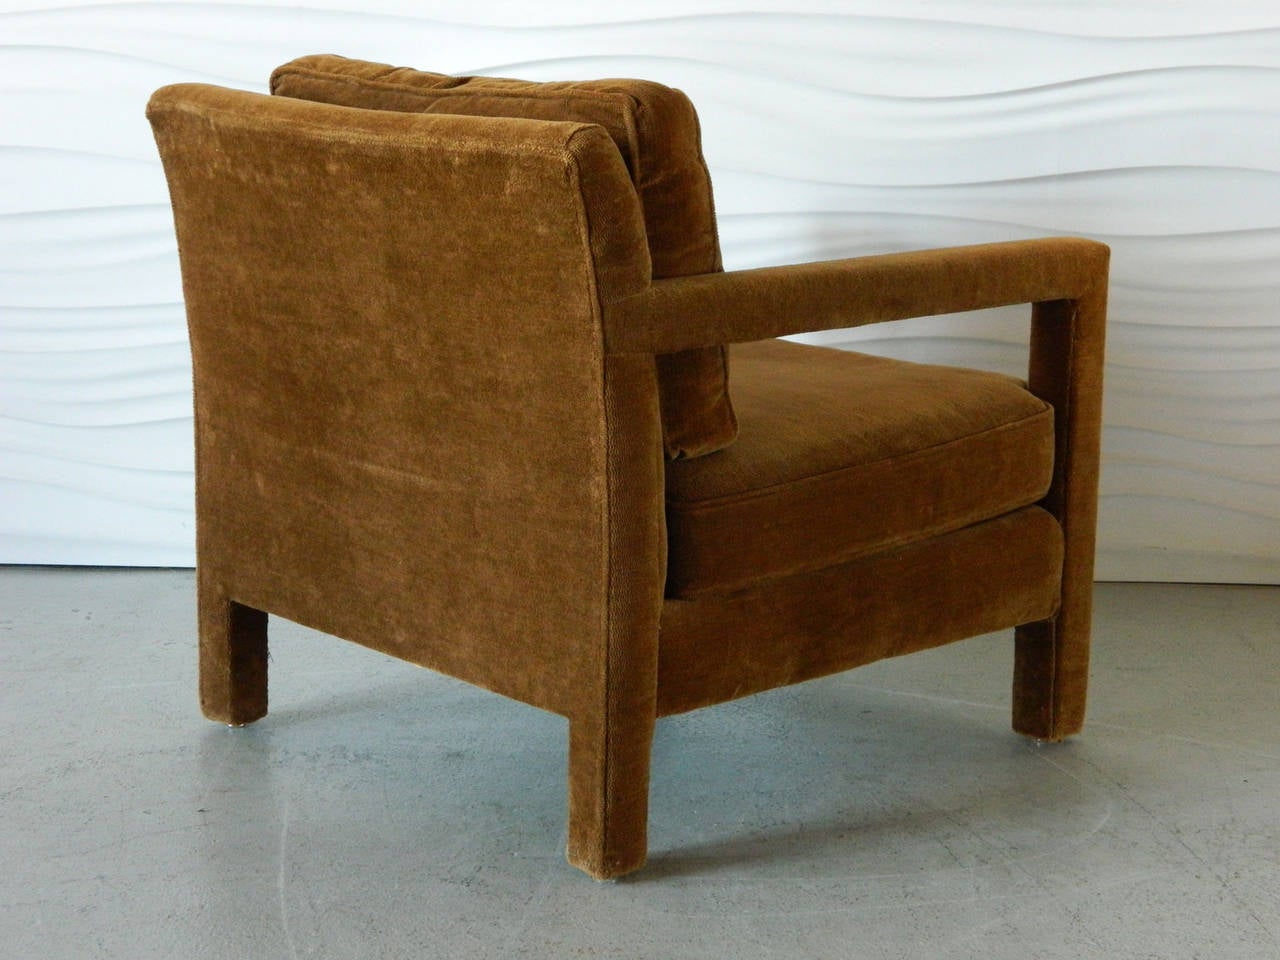 This vintage upholstered parsons chair was made in America and manufactured by Flair.